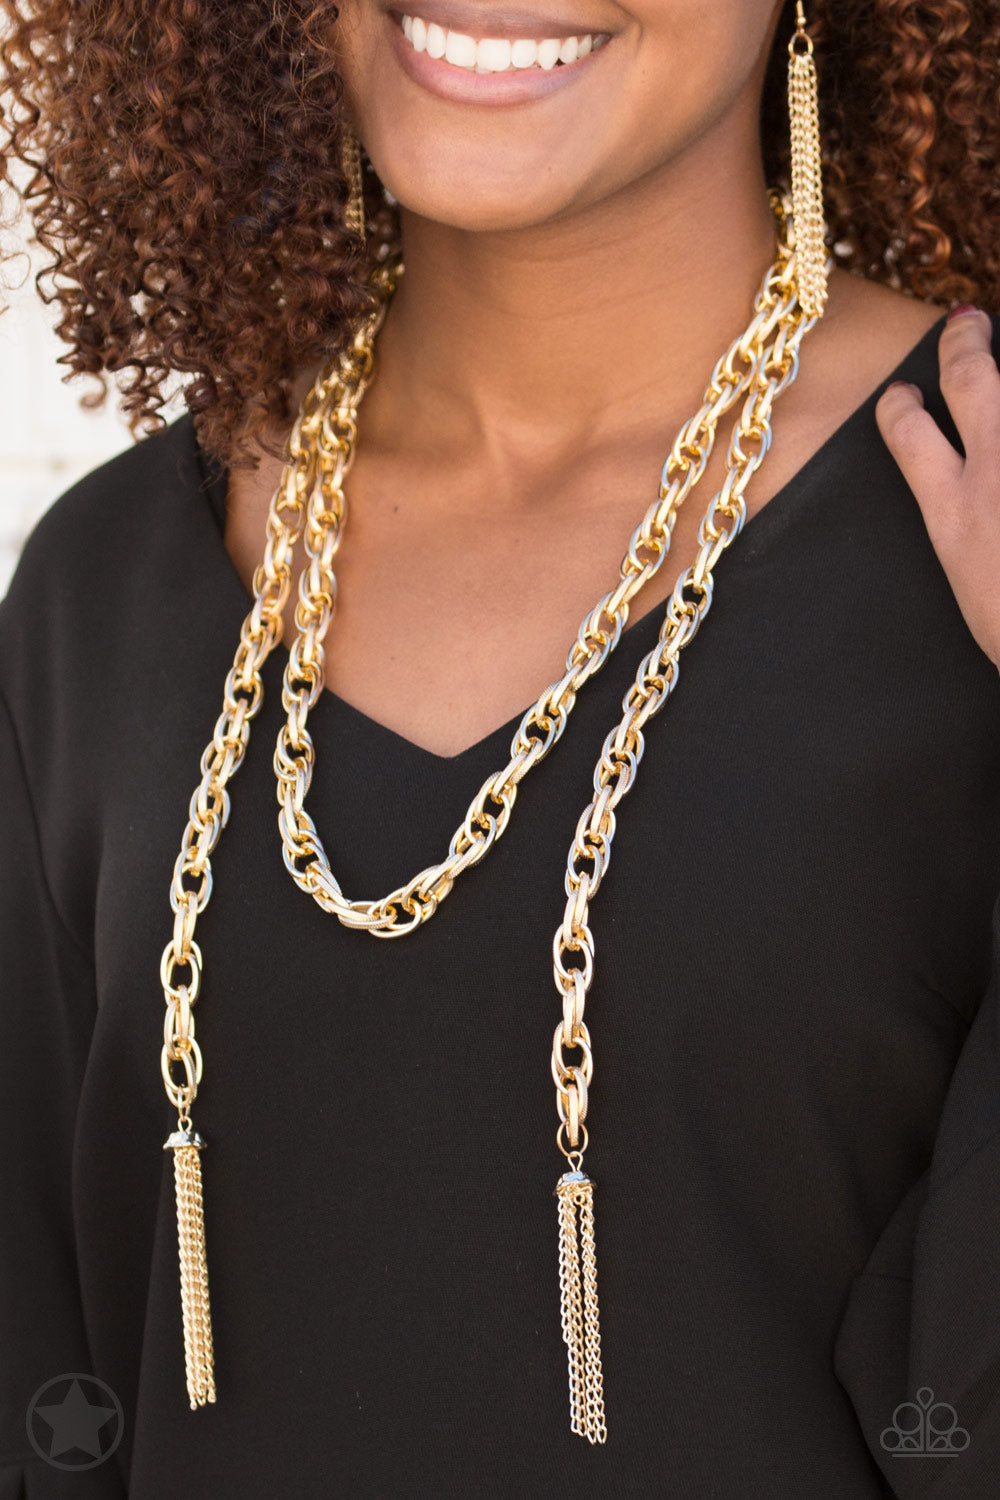 Paparazzi SCARFed for Attention Gold Scarf Blockbuster Necklace